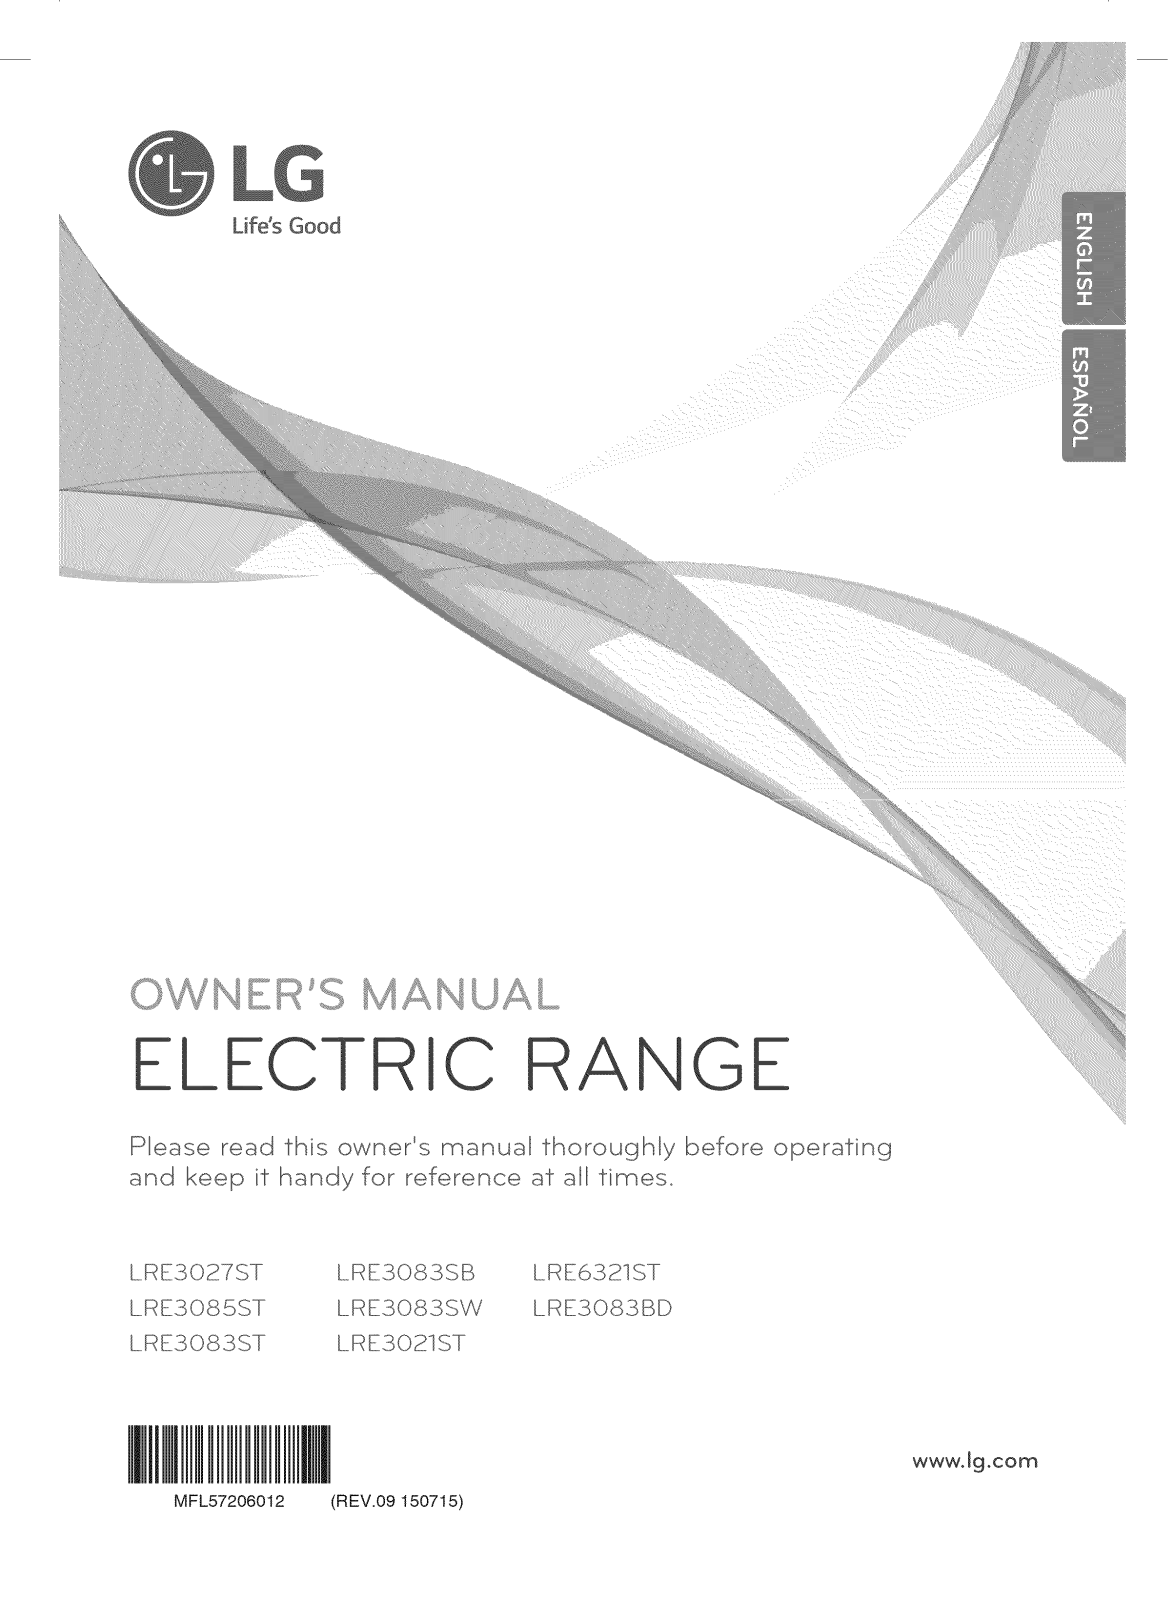 LG LRE3083BD/00, LRE3085ST, LRE3027ST, LRE3021ST/00 Owner’s Manual